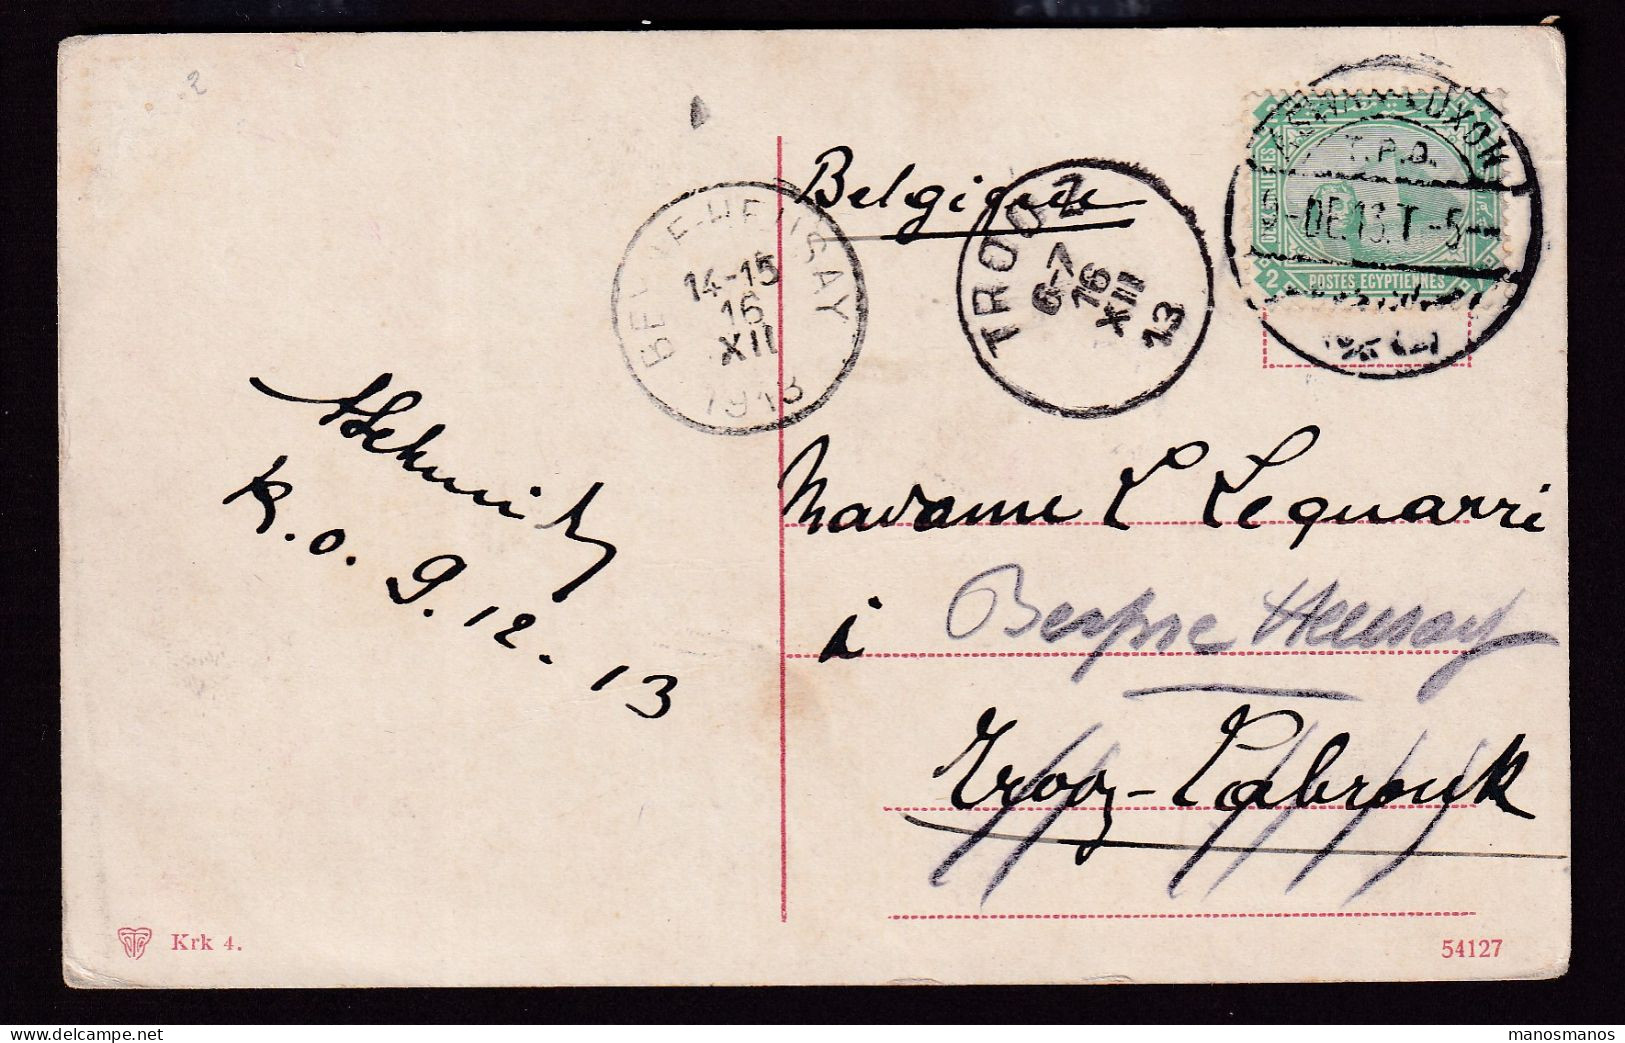 387/31 -- EGYPT ASWAN-LUXOR TPO (in Small Letters) - SCARCE Type  - Viewcard Cancelled 1913 To TROOZ Belgium - 1866-1914 Khedivate Of Egypt